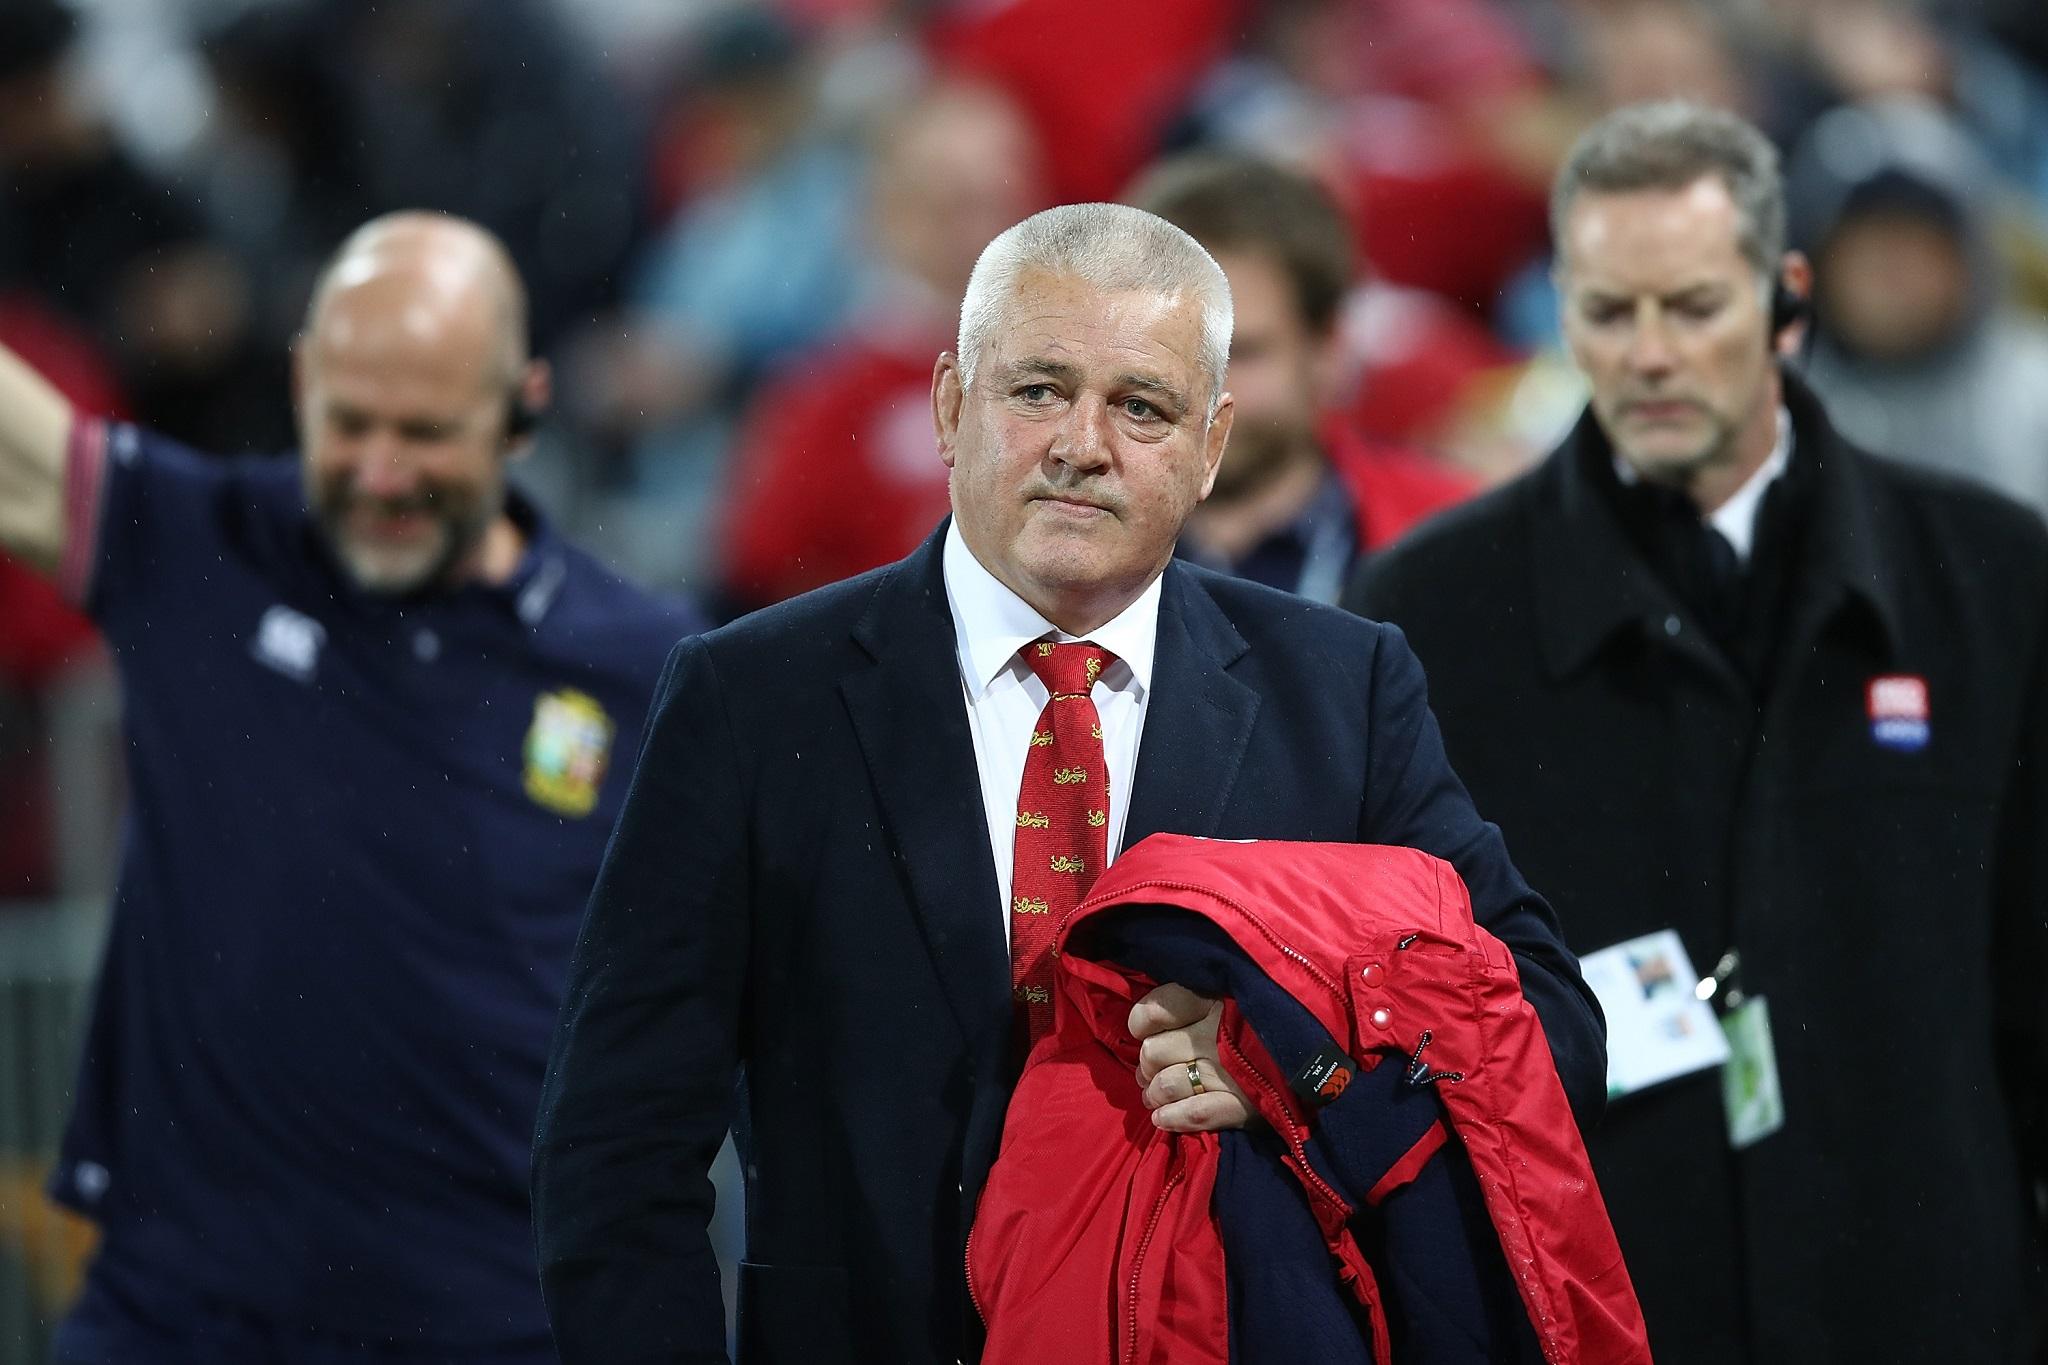 Warren Gatland believes his Lions side were galvanised by the personal attacks launched at him (Getty )